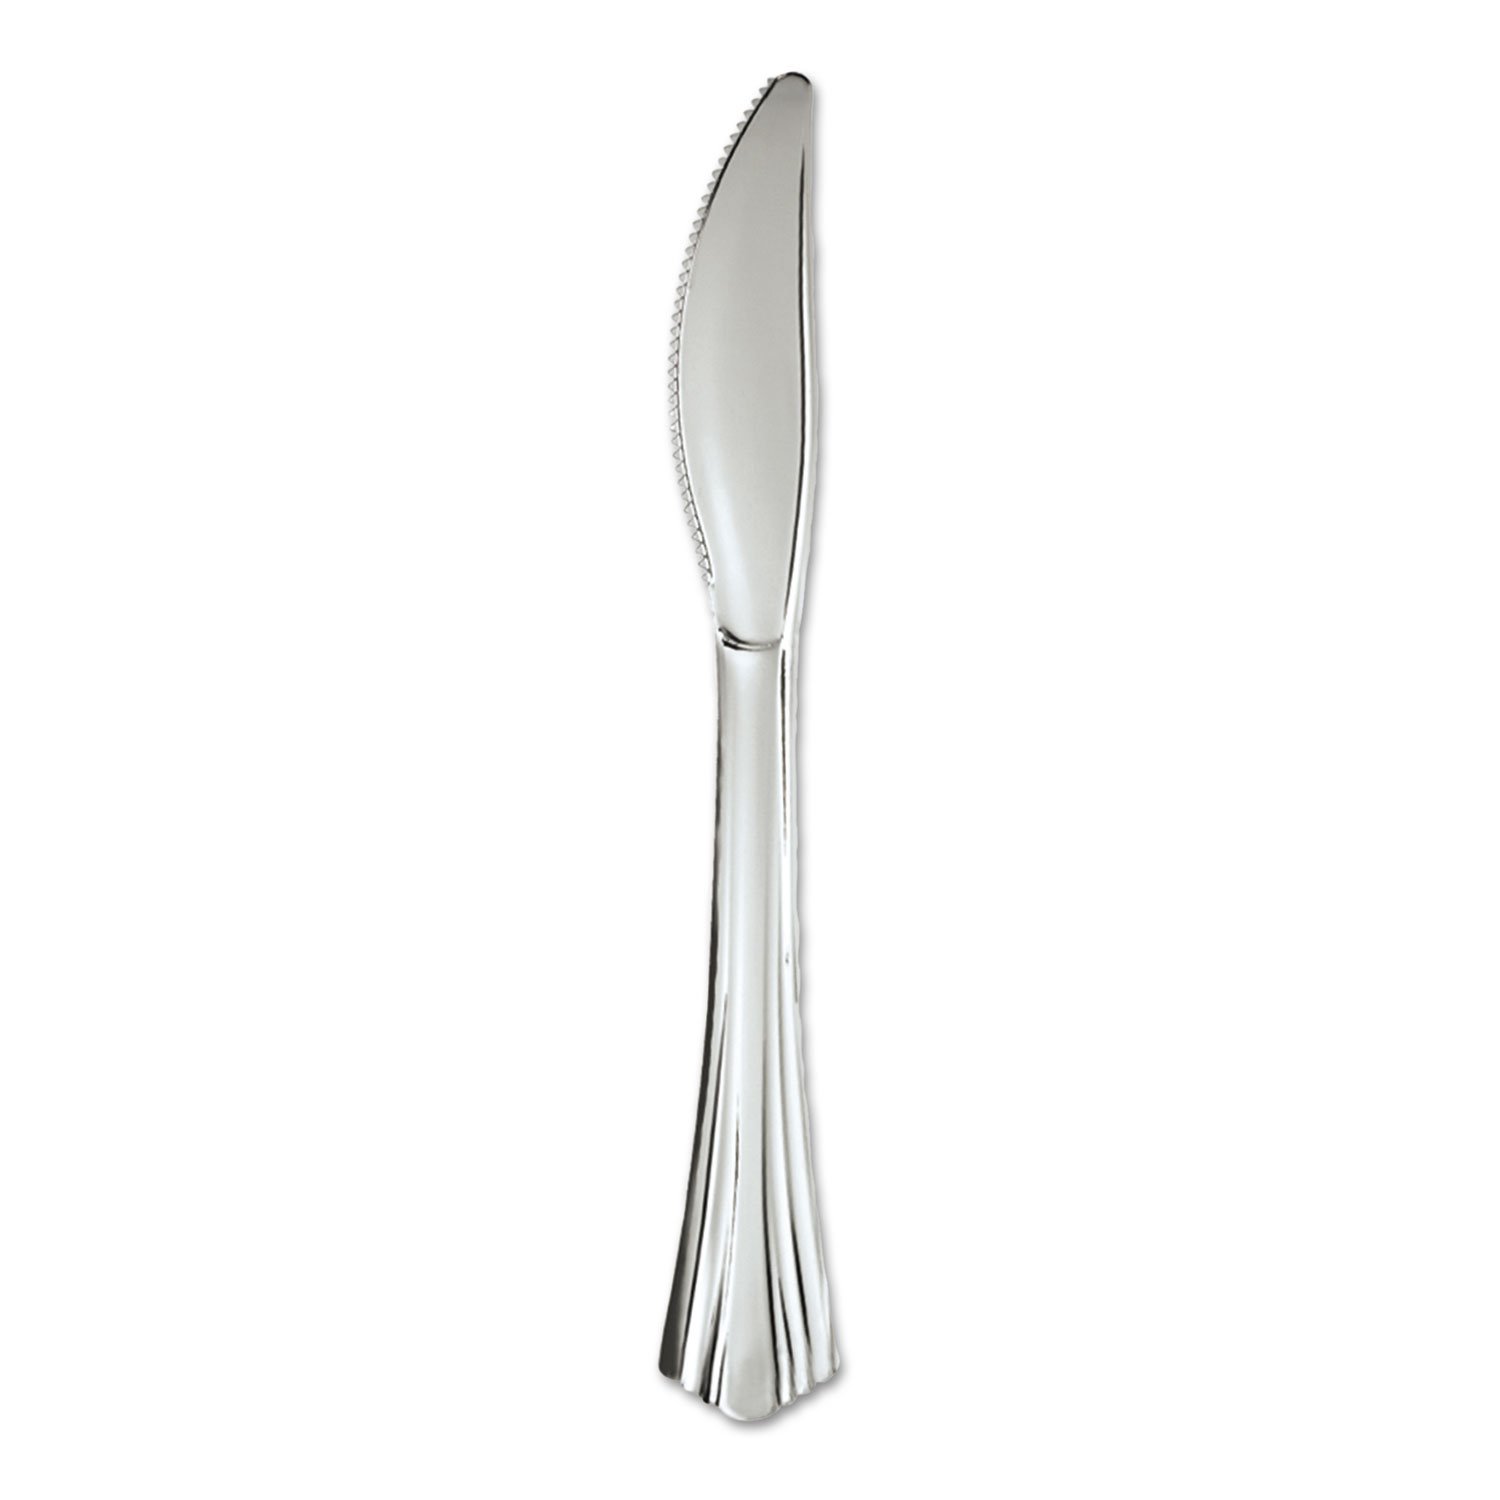 WNA Comet Reflections Knife 7.5 In Silver 600 (WNA630155) Category: Plastic Knives